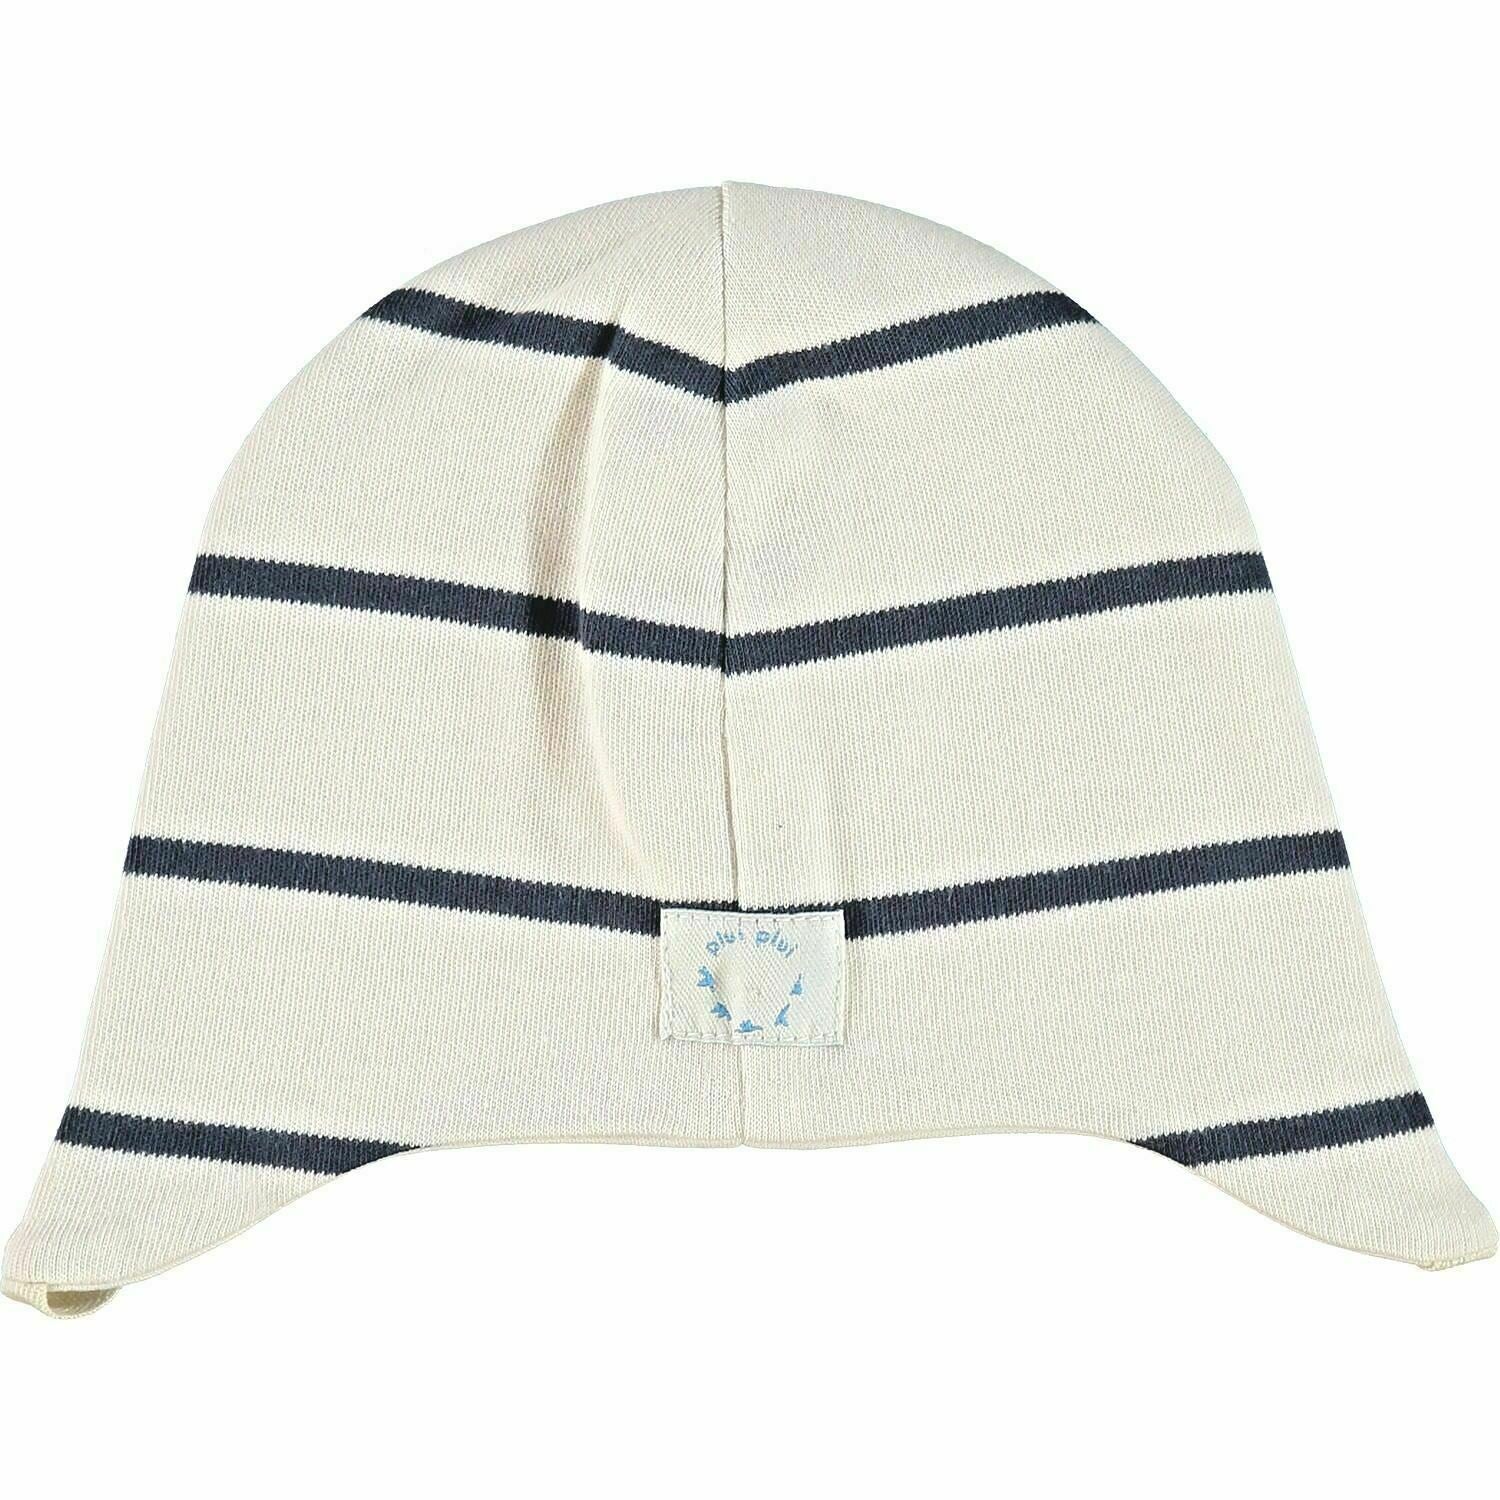 PLUI PLUI Baby Boys' Hat - Cream with Blue Stripes - 1 years to 2 years